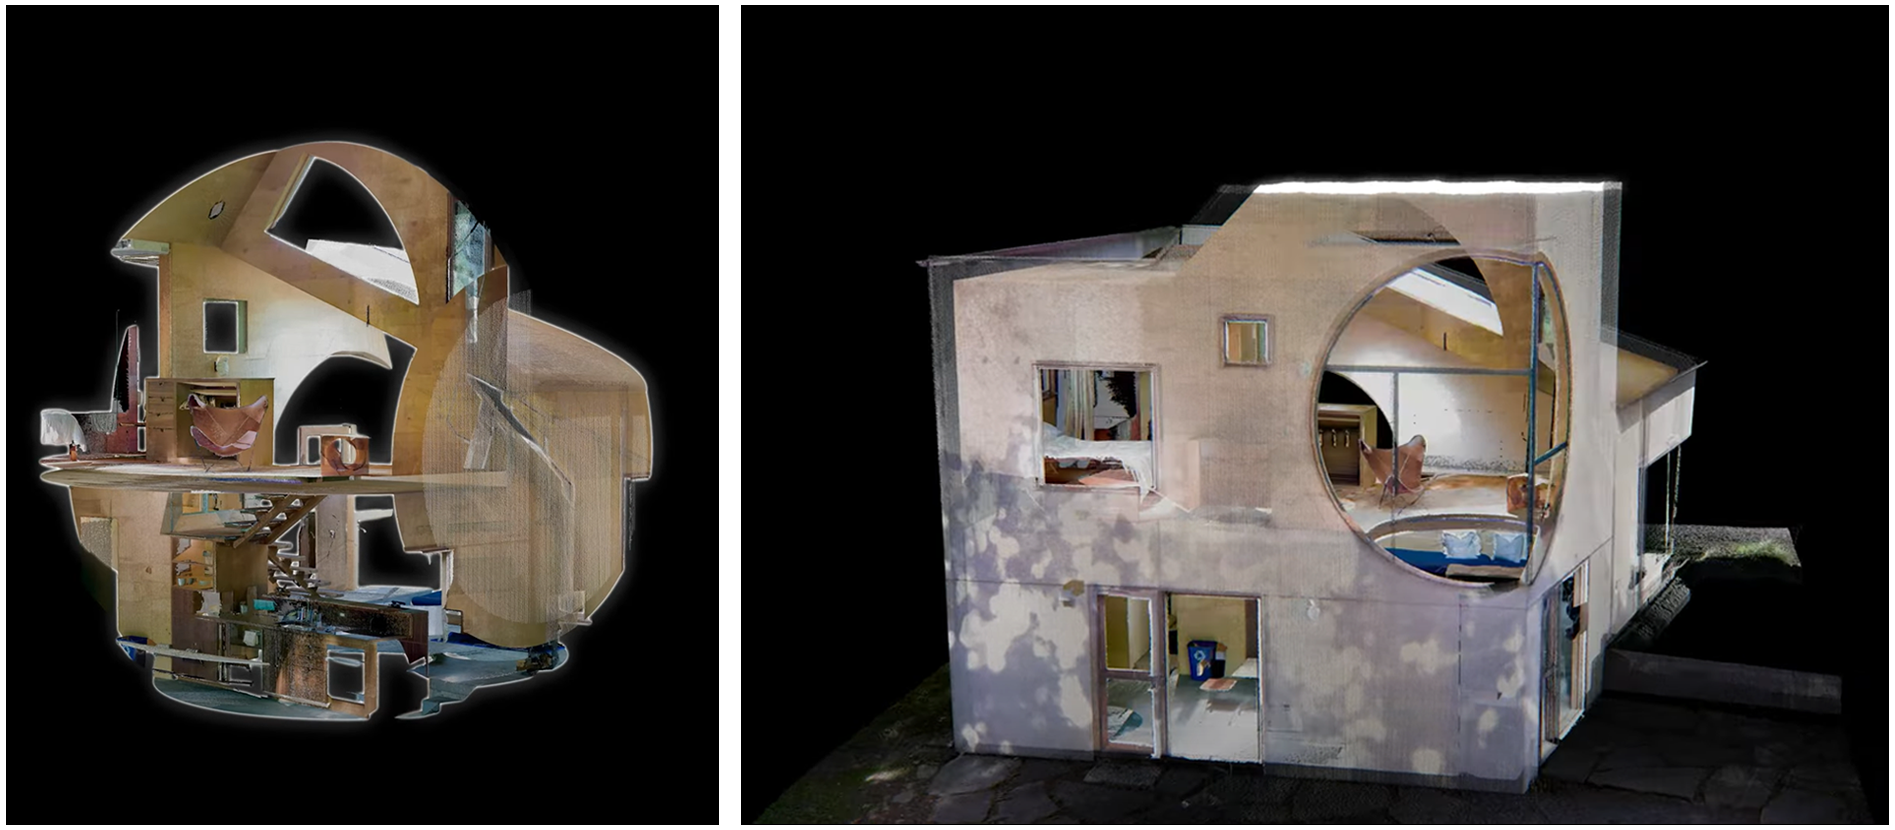 Point cloud data of Ex of In House taken with the BLK360